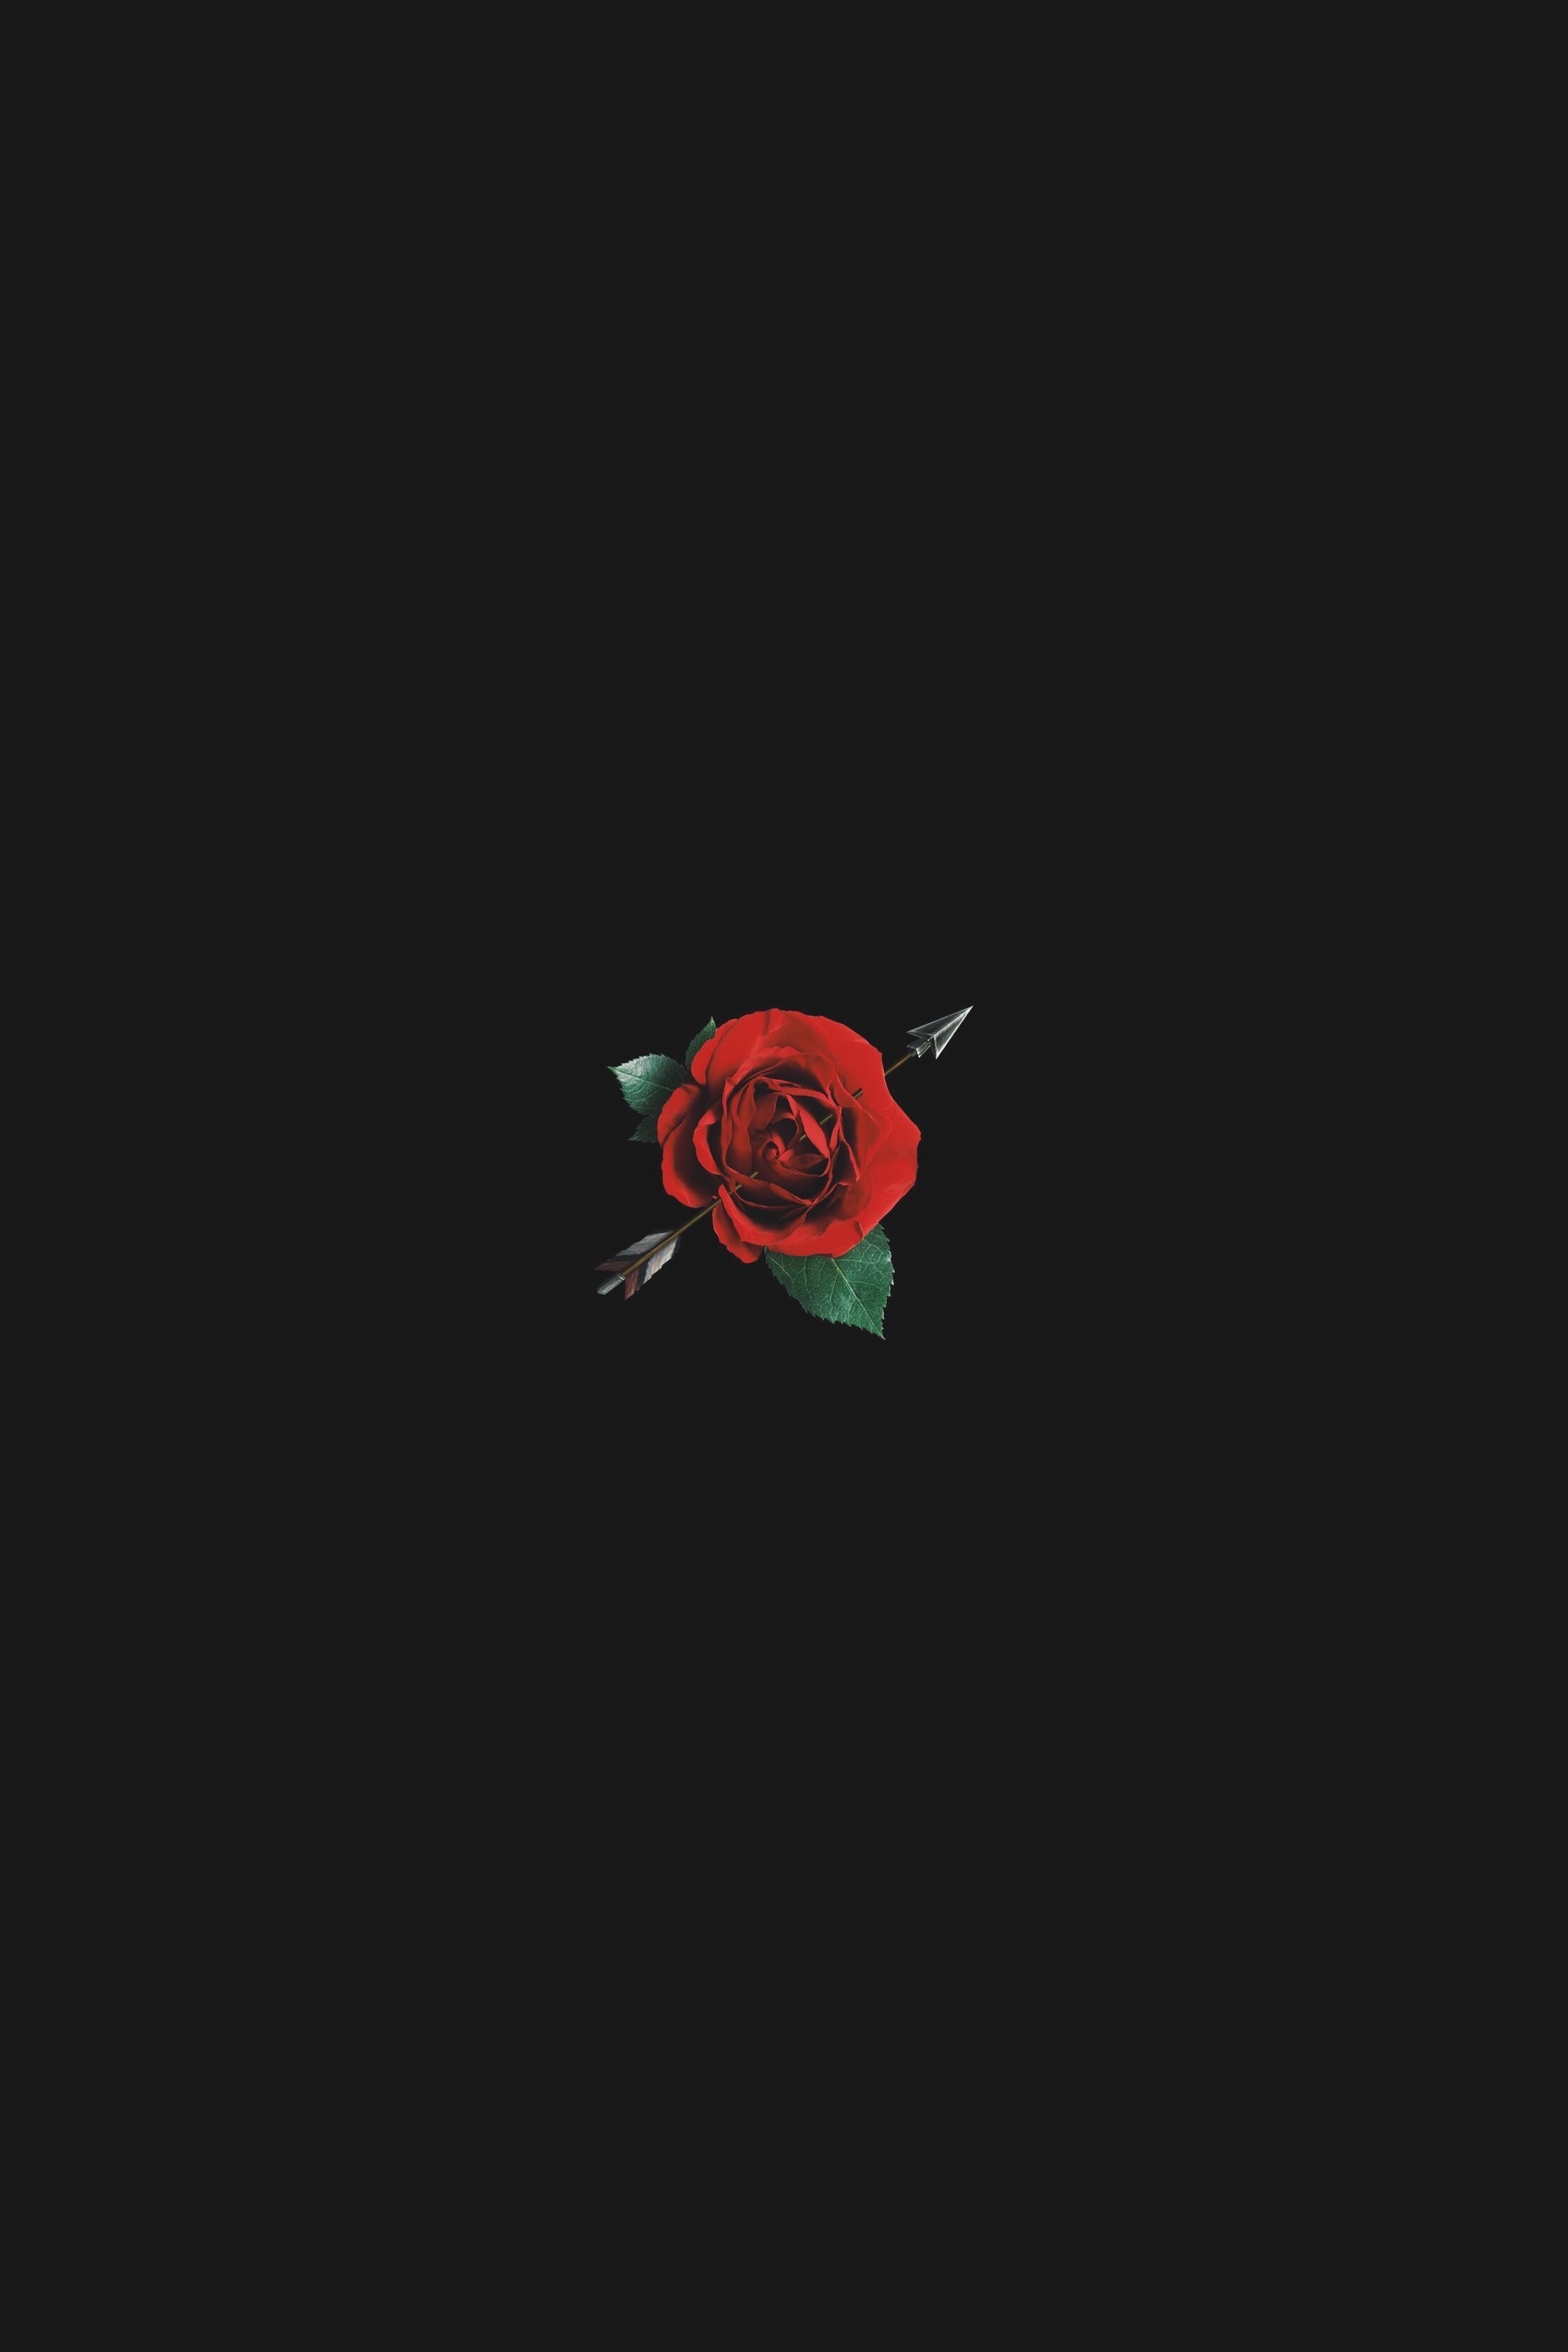 Aesthetic Red Rose With Black Background